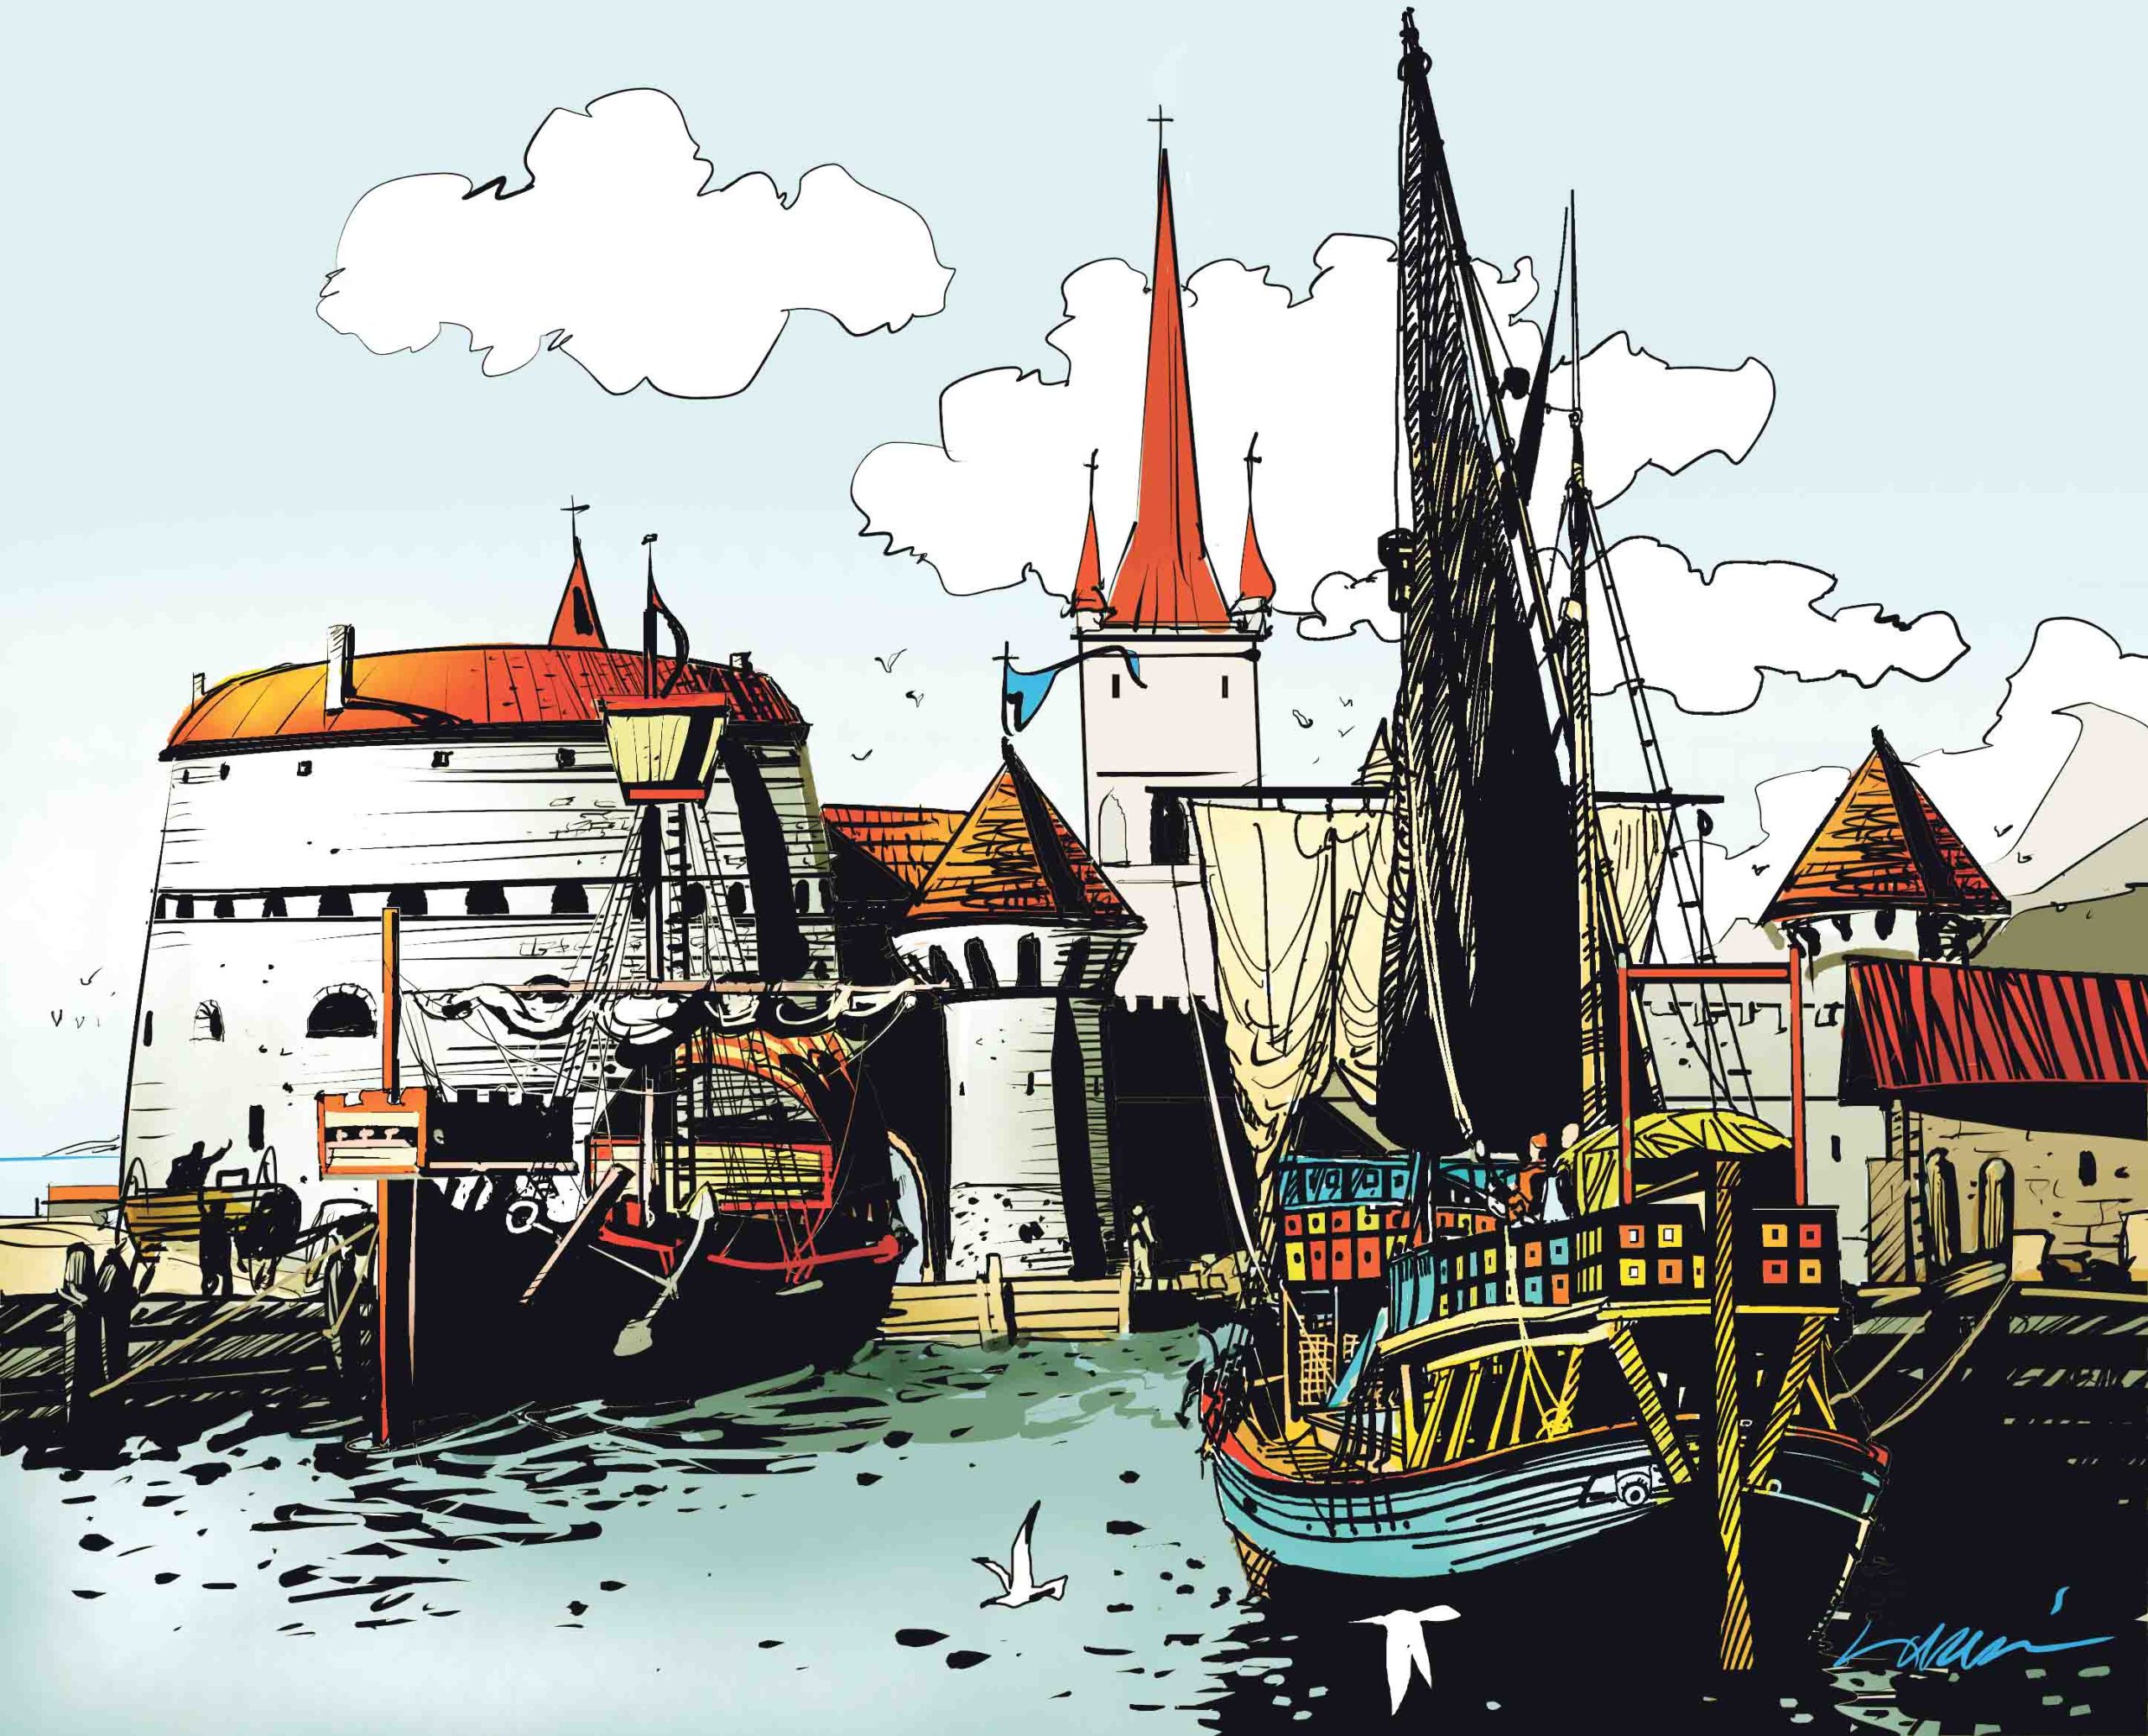 In the Middle Ages, Tallinn was a Hanseatic League city where German was the primary language